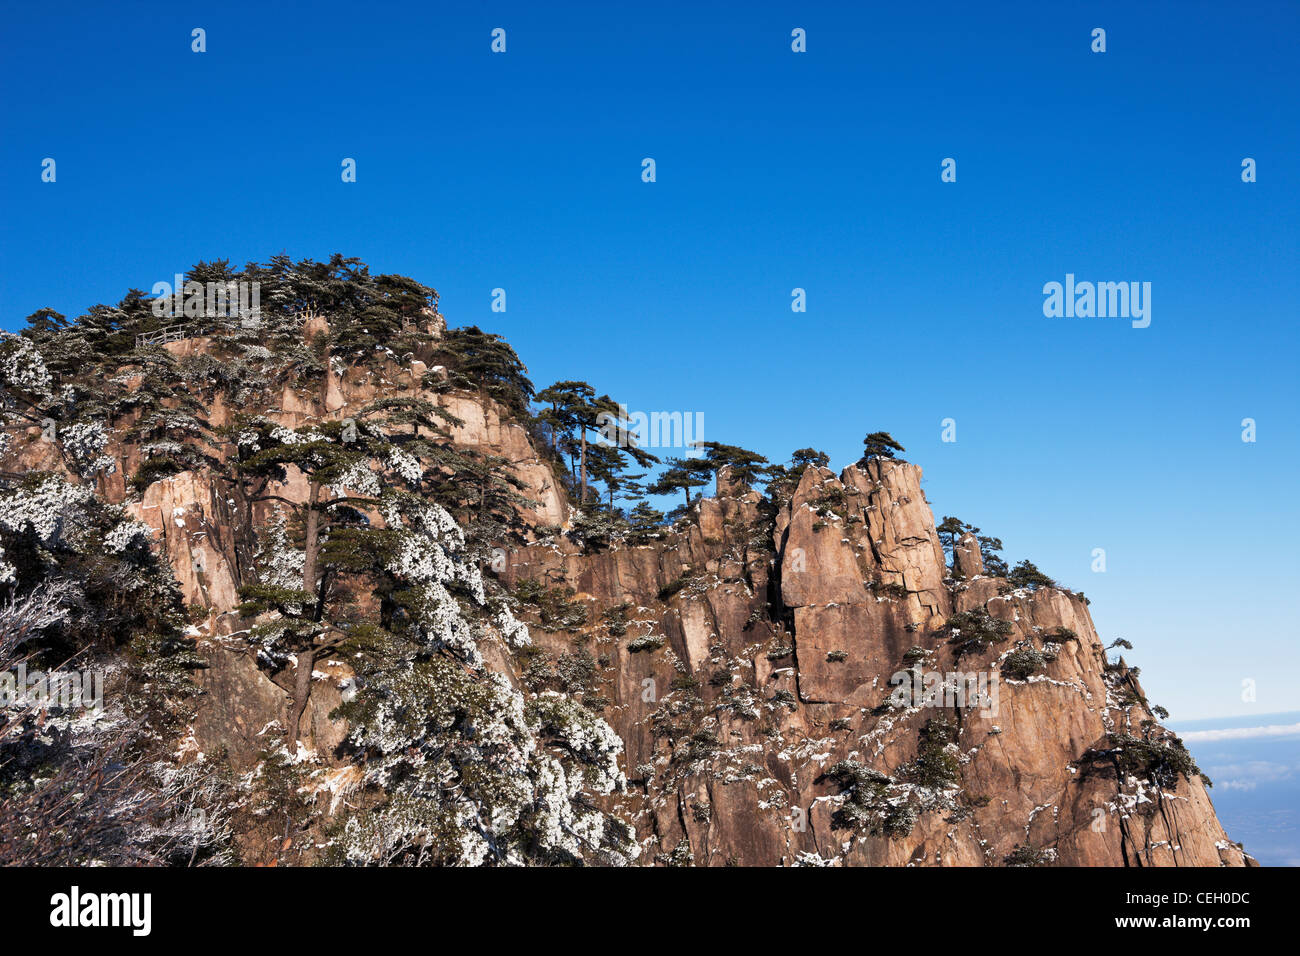 China，Huangshan，white，Hill，Beauty In Nature，winter，tree，Physical Geography，Nobody，sky，sunlight，Travel Destinations，travel，Cloud Stock Photo